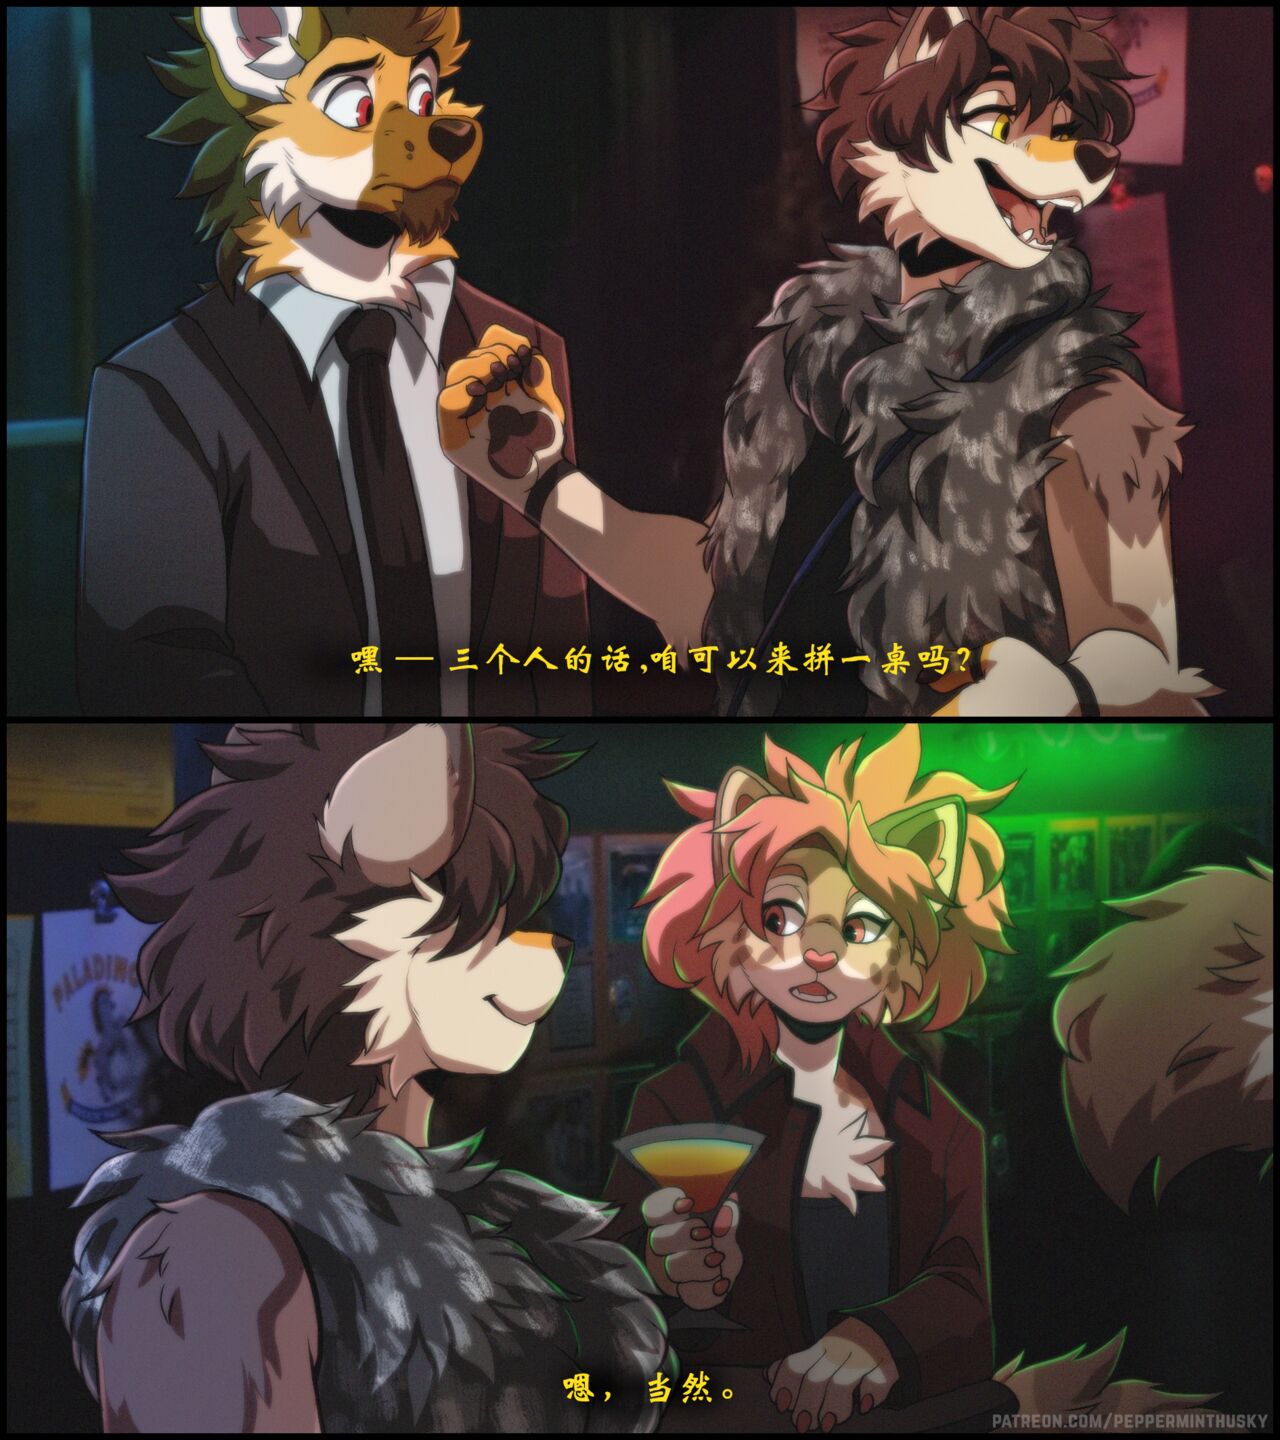 [PeppermintHusky] Table for Three: Remix (Ongoing) ｜三人一桌：重置 [Chinese] 【DrrT汉化】 